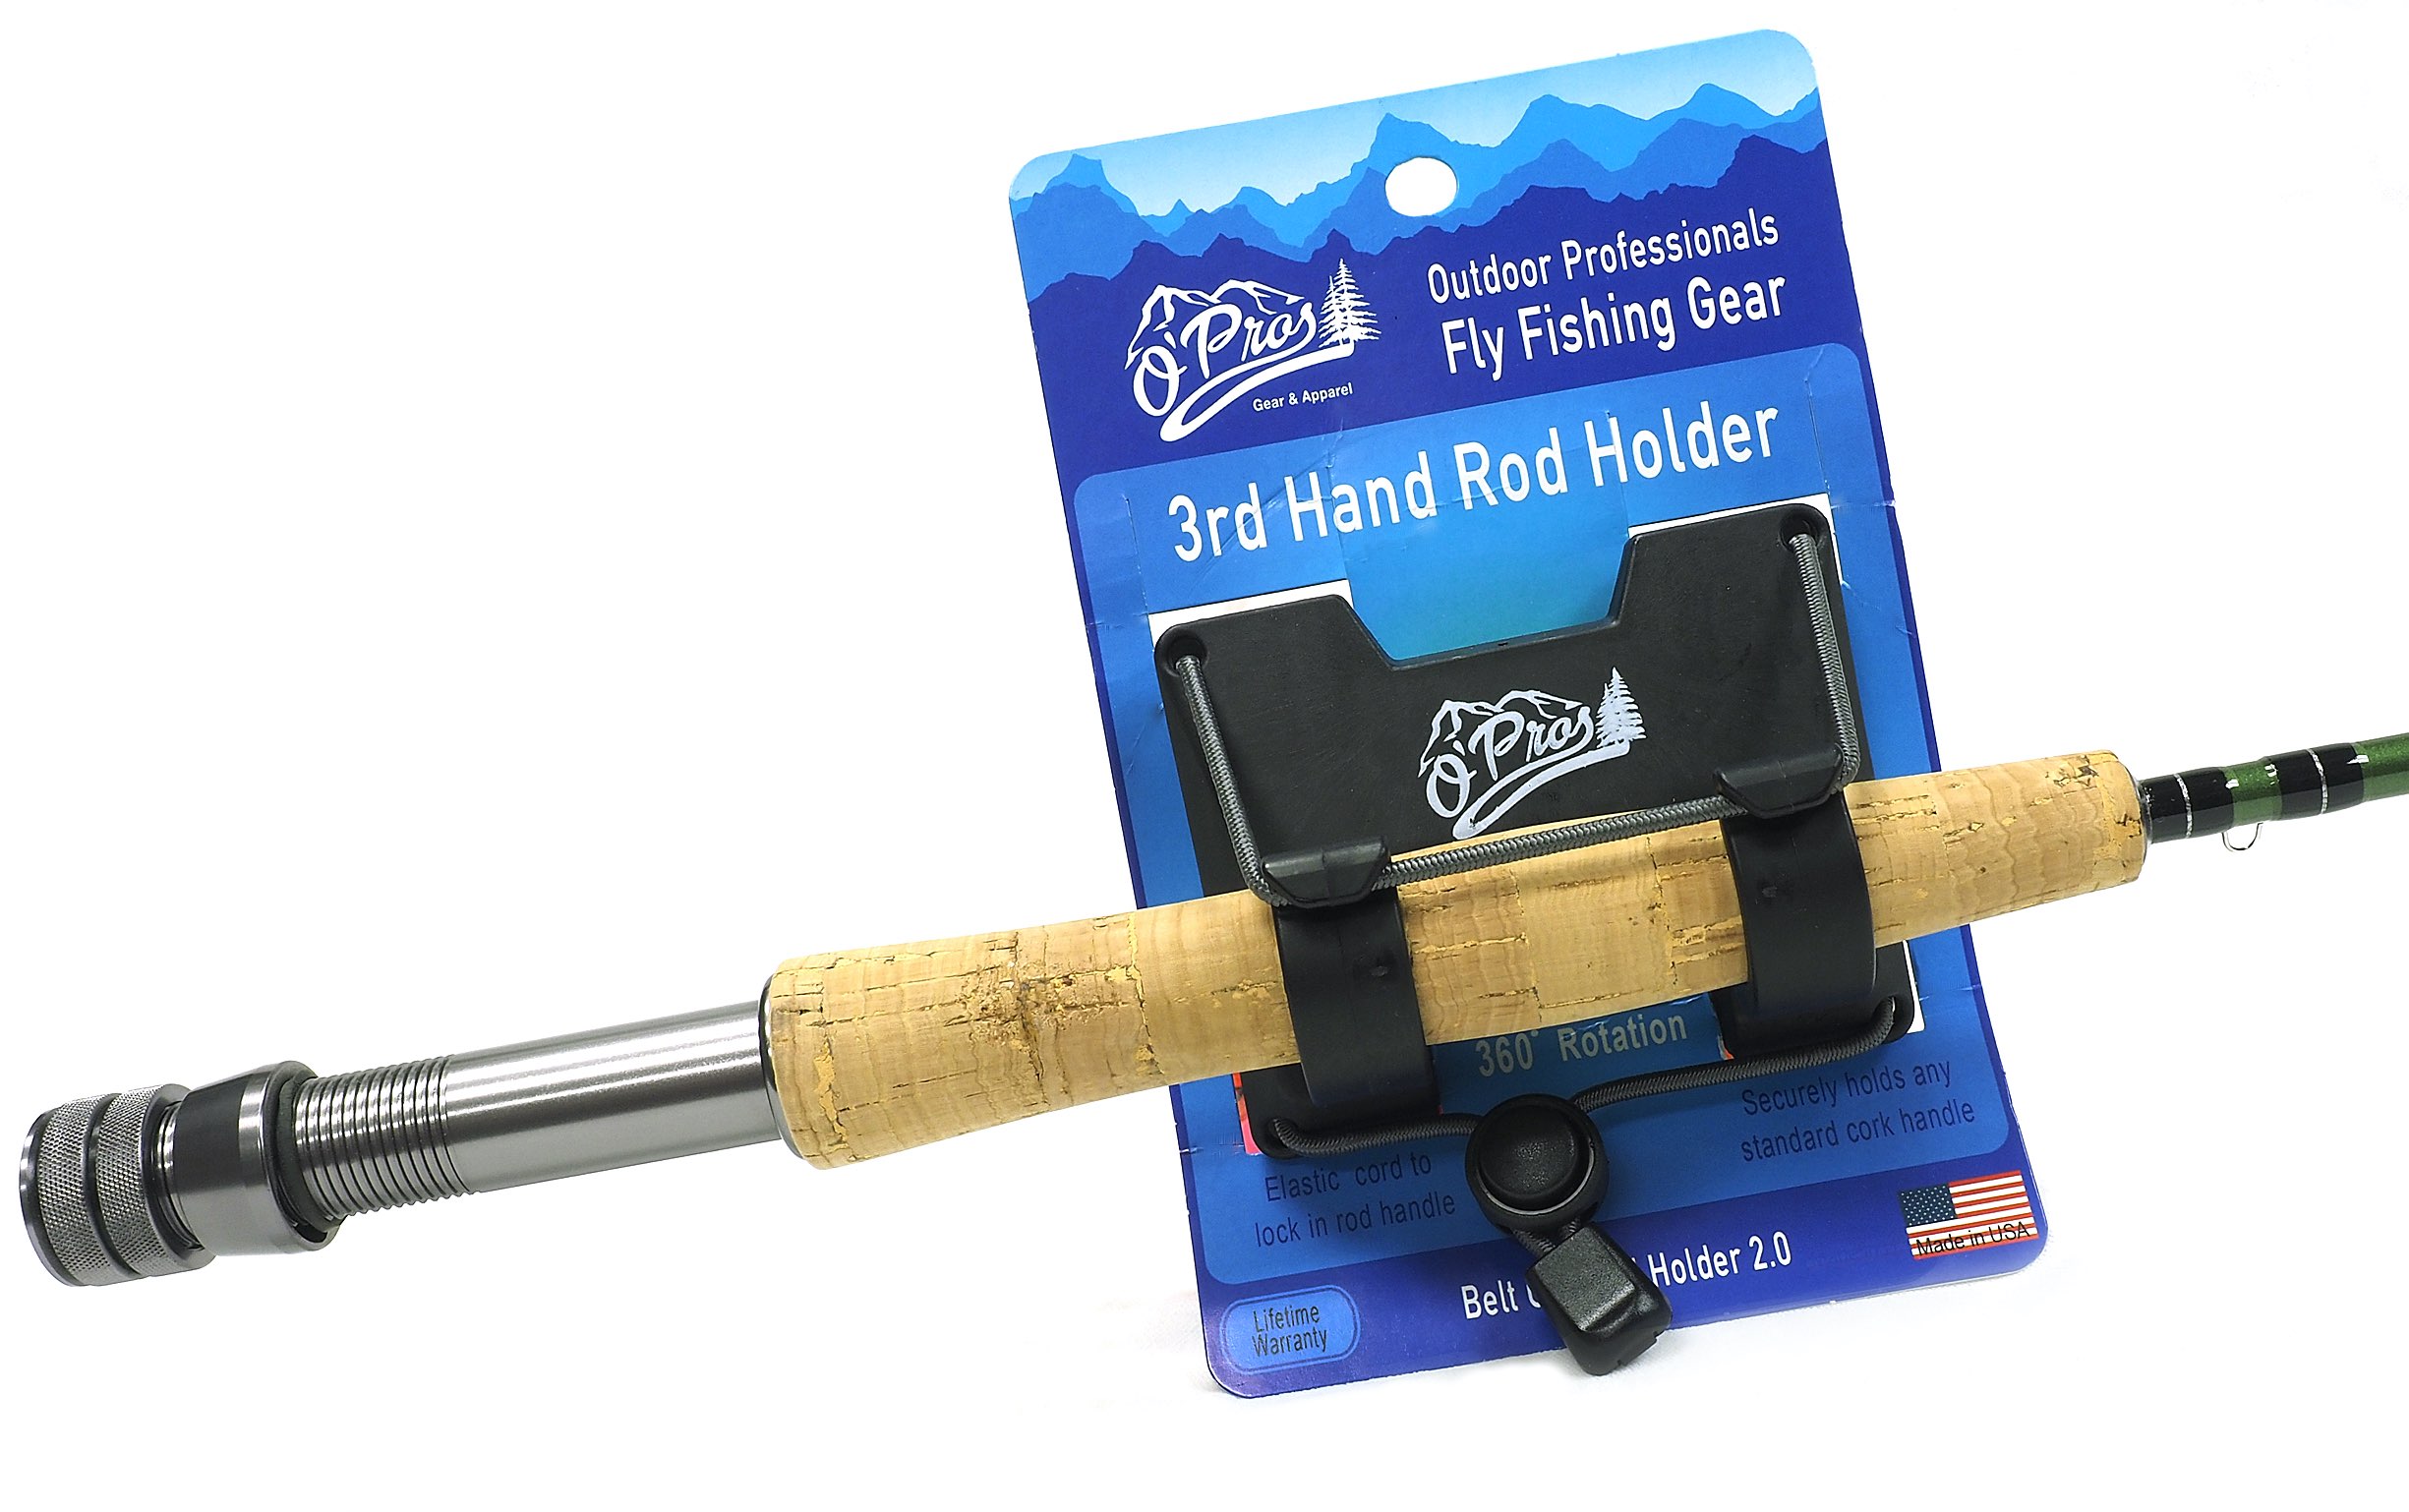 O'Pros Outdoor Professionals Fly Fishing Gear 3rd Hand Rod Holder